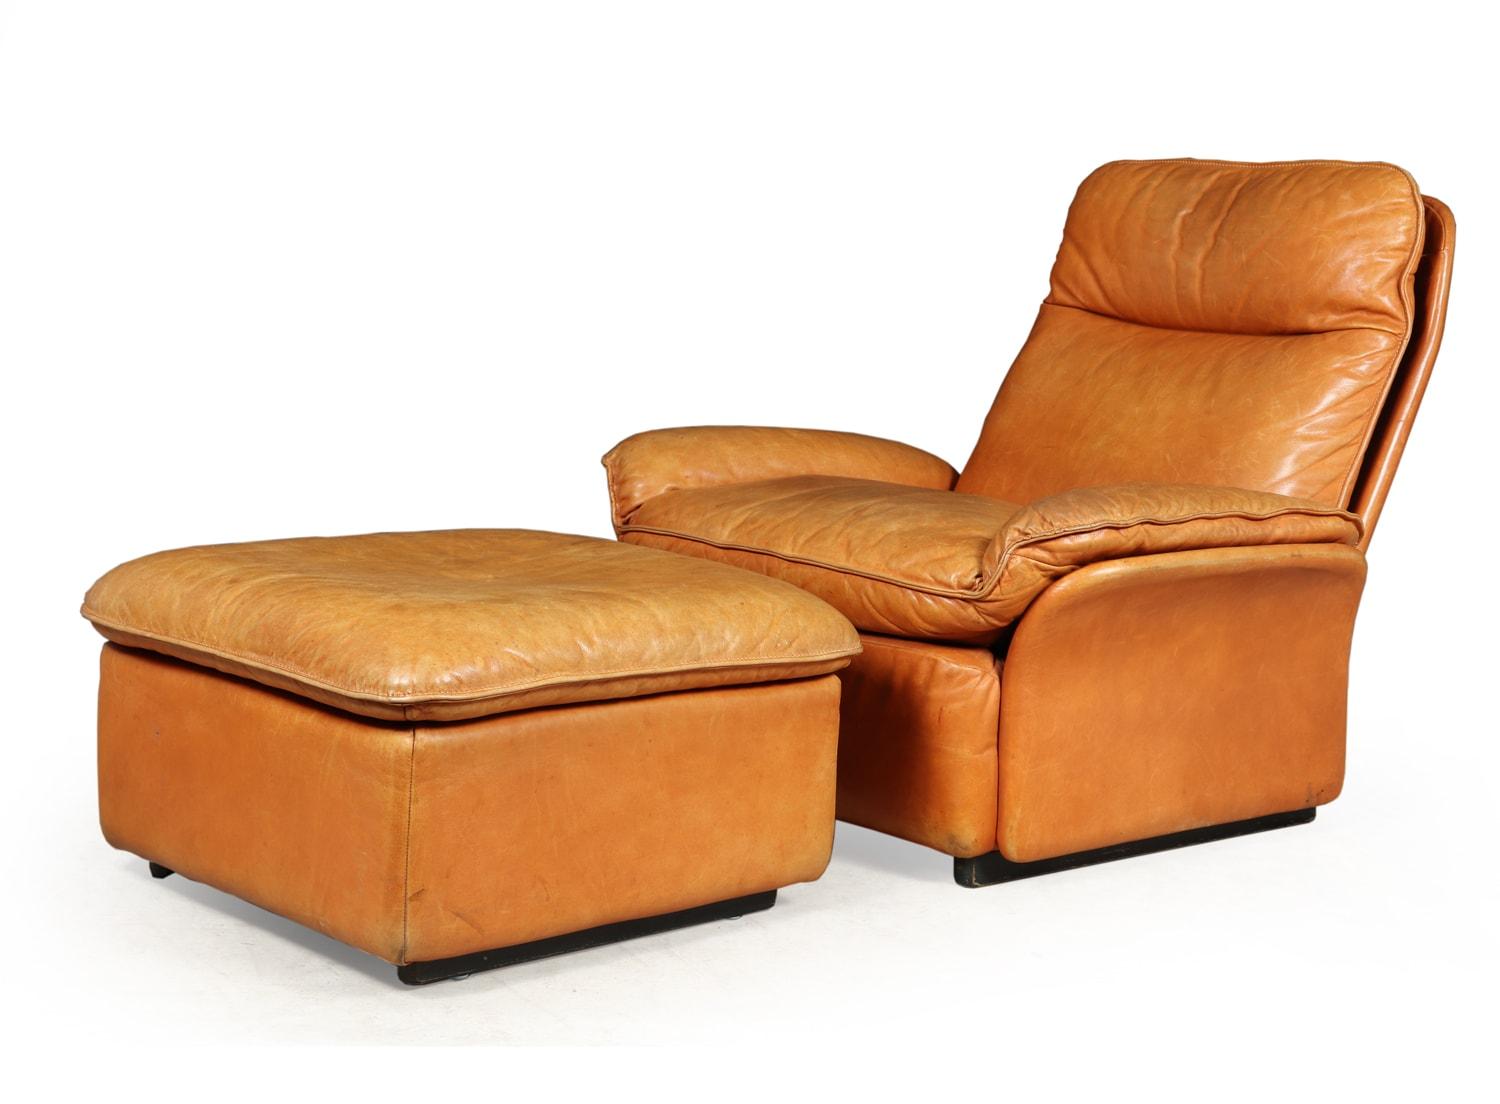 A De Sede leather armchair and foot stool model DS49

Original 1960s production of a DS-49 and foot stool in thick tan leather. Produced in Swizerland and is a Mid-Century Modern piece. The chair features a push spring back recline with the chair